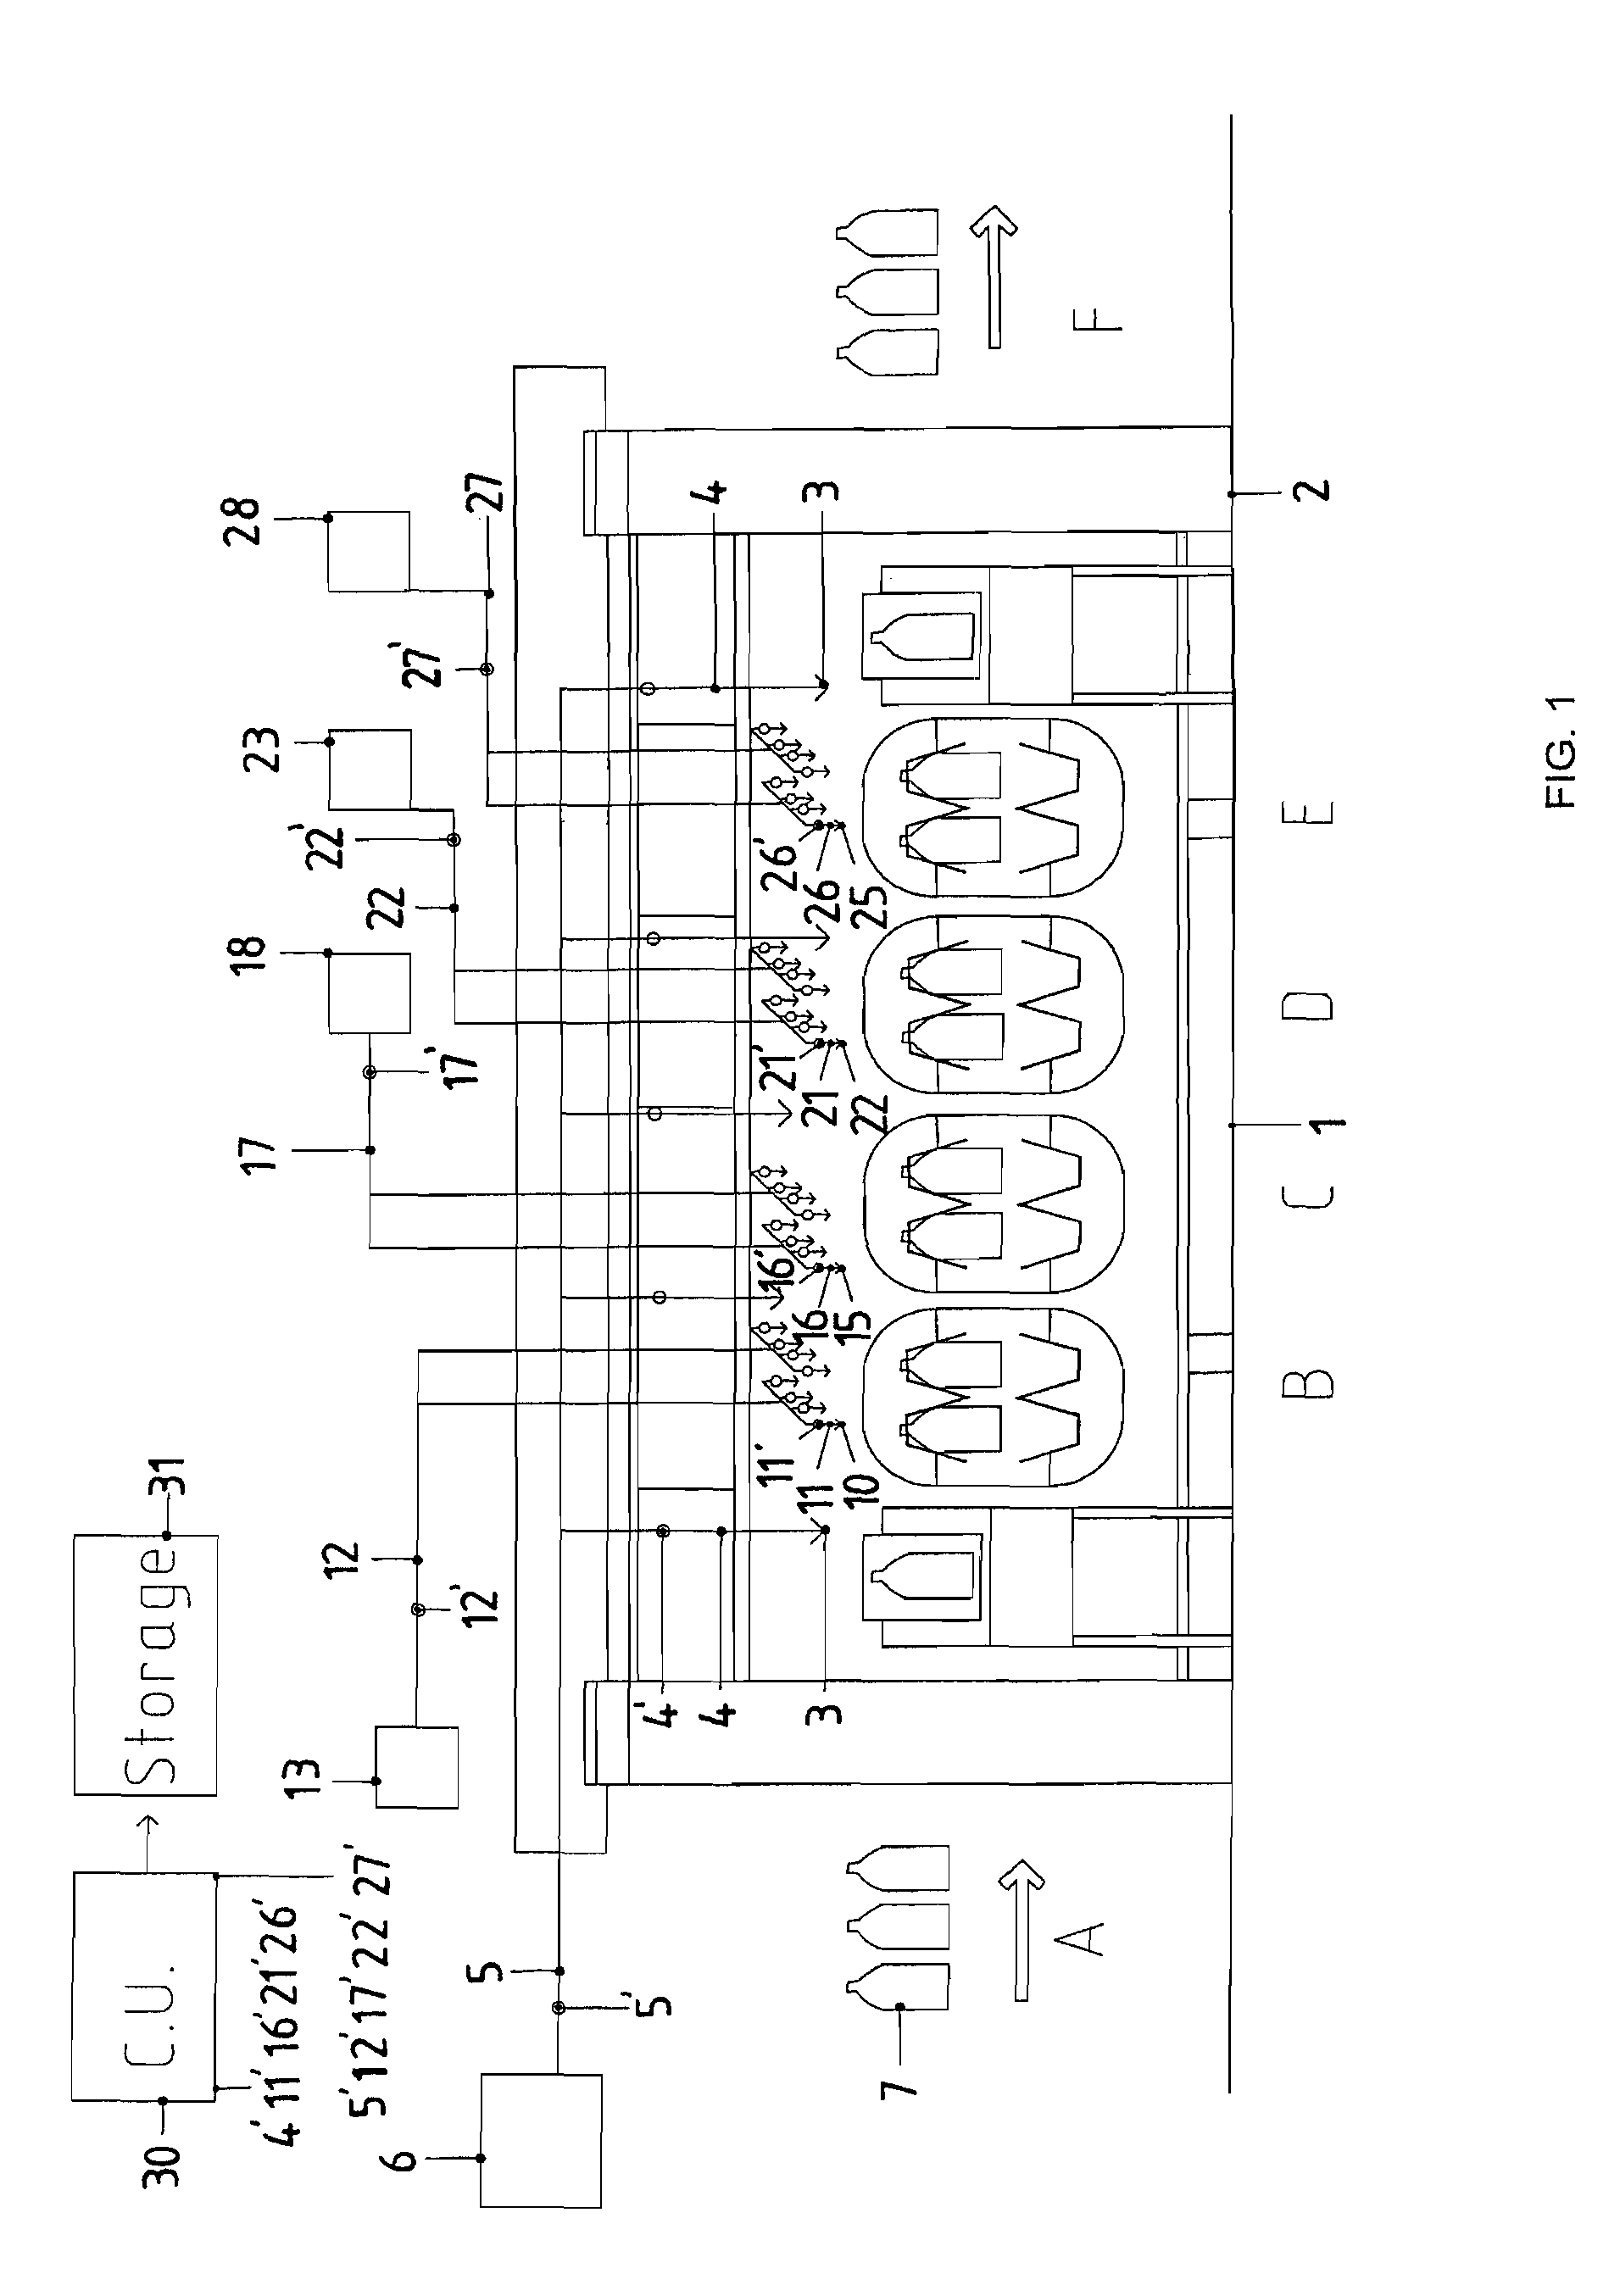 Method for controlling the operation of an aseptic filling machine